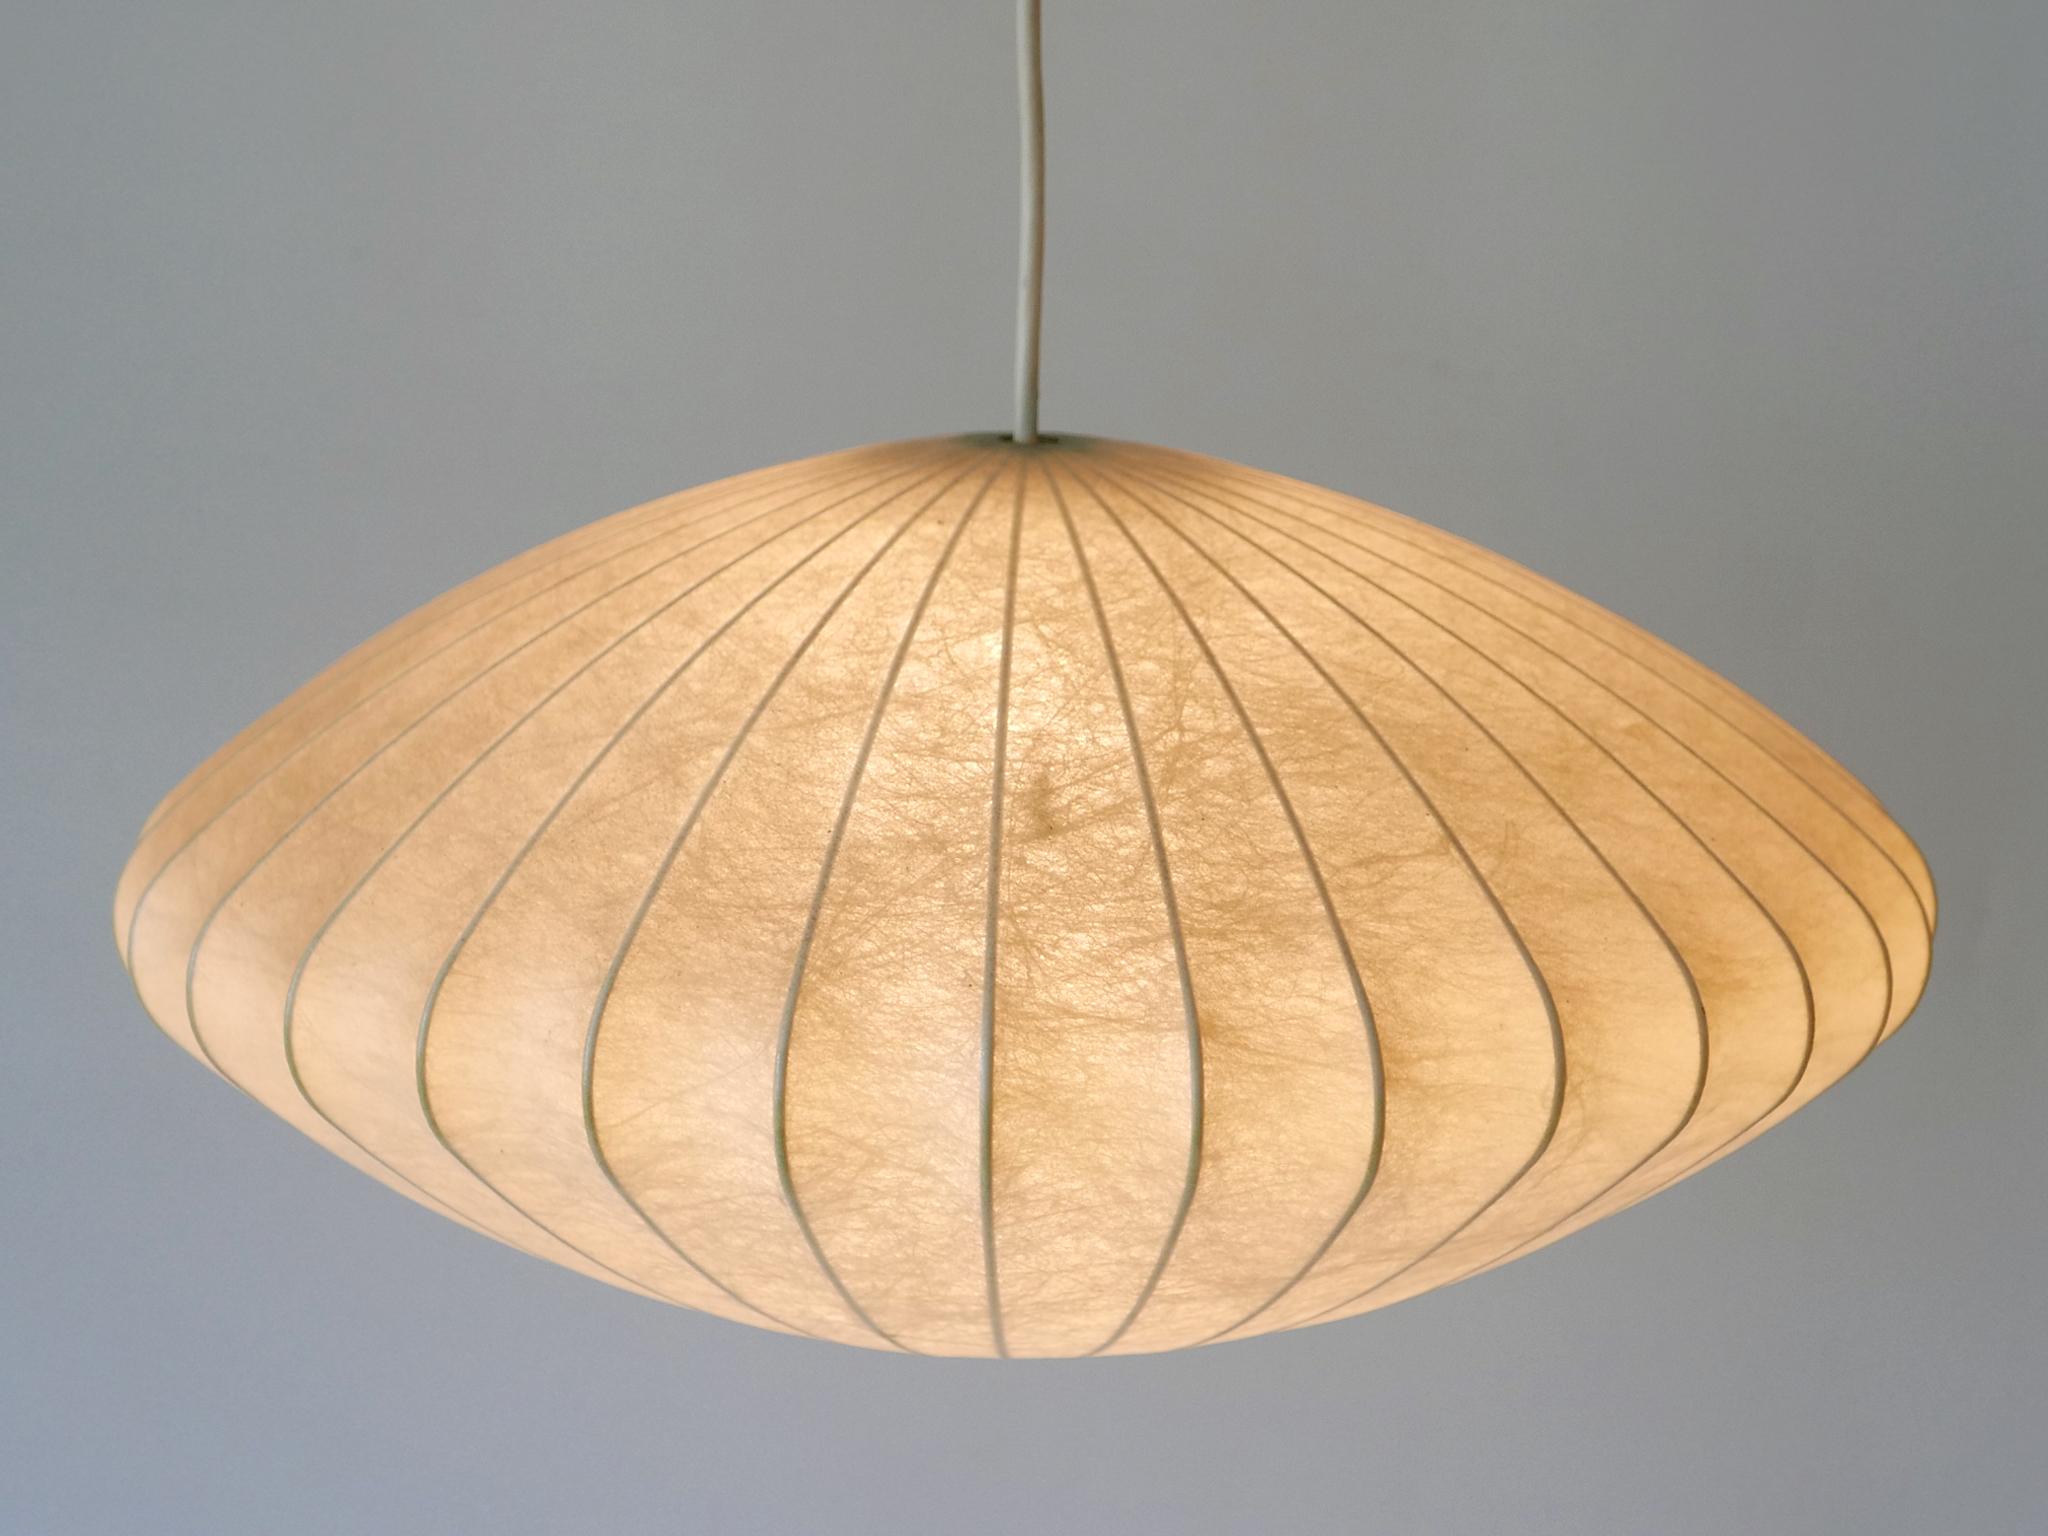 Rare Mid-Century Modern Cocoon Pendant Lamp or Hanging Light by Goldkant 1960s For Sale 5